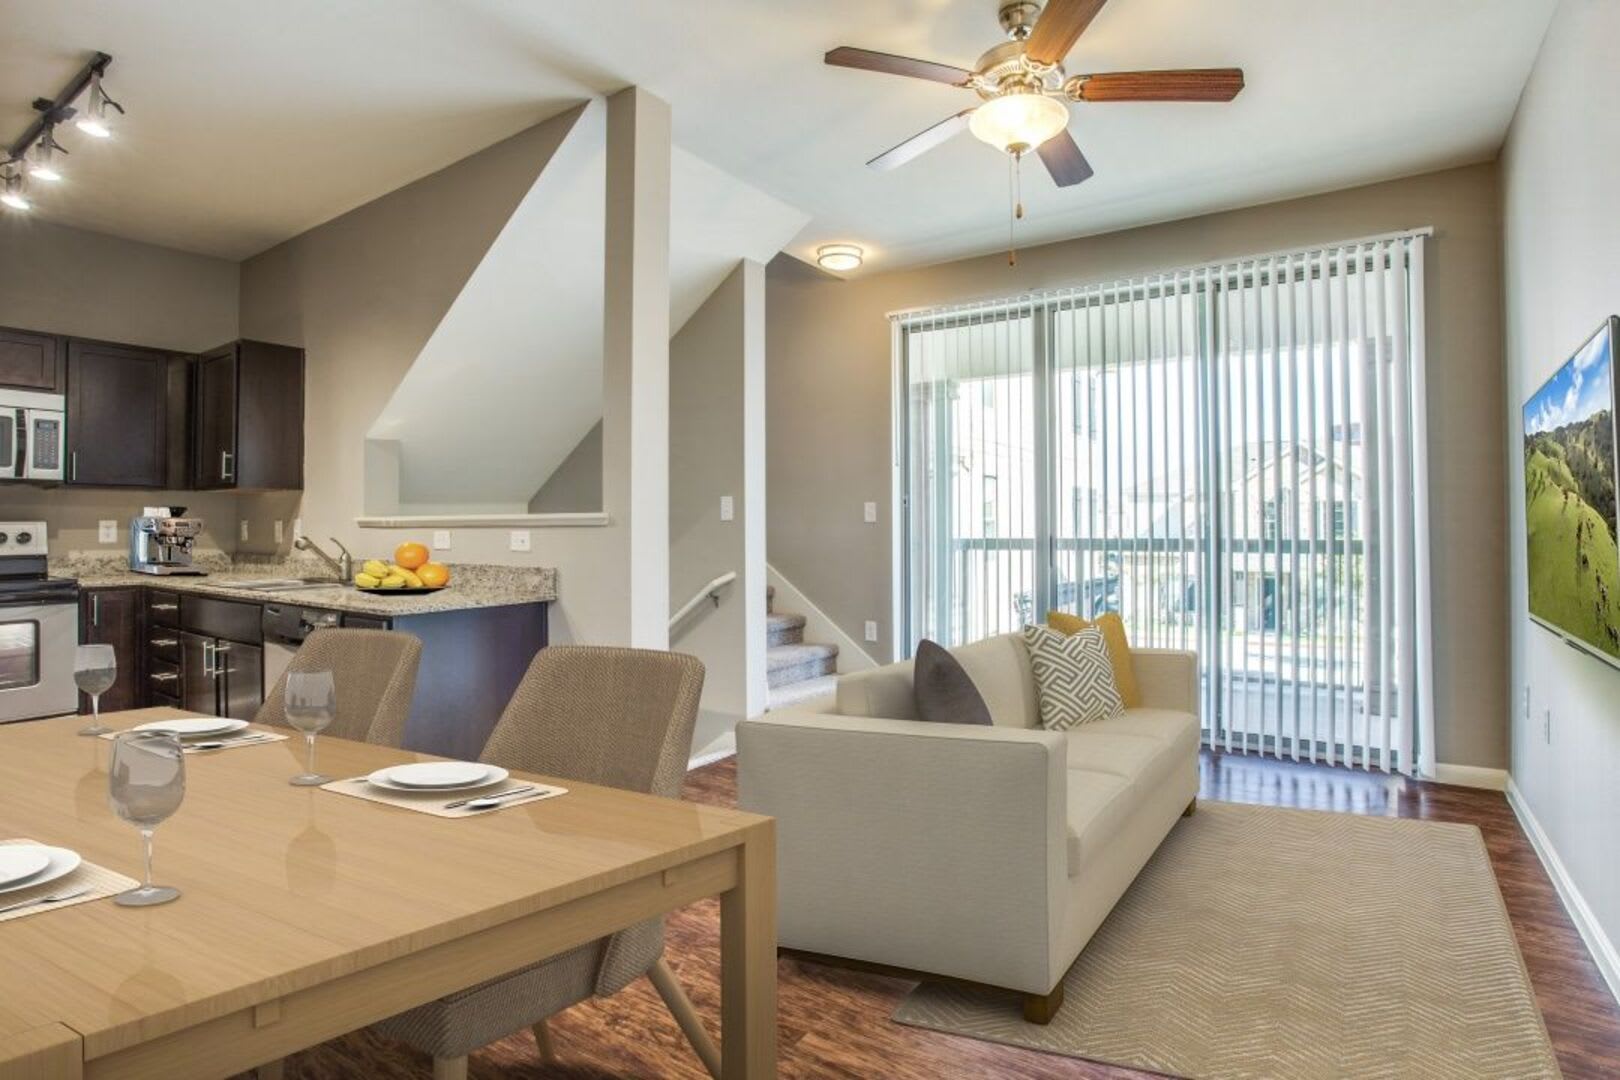 Retro-modern furniture and classic decor in a model home's living area at Parkside Towns in Richardson, Texas